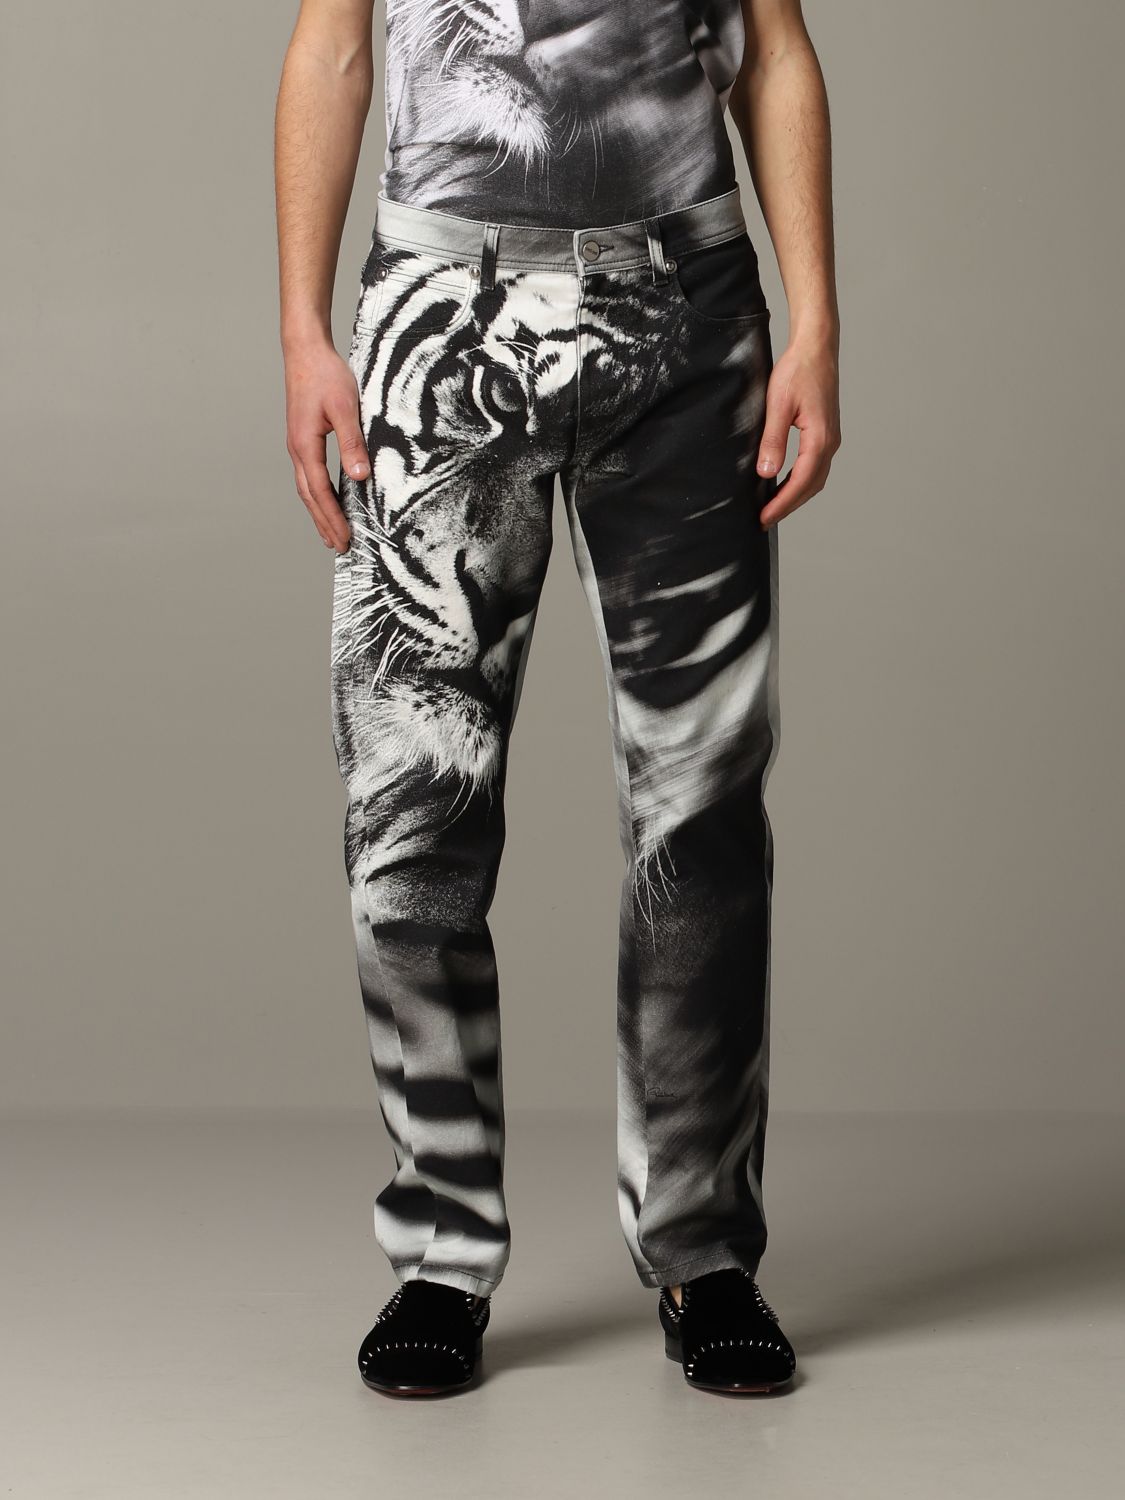 Roberto Cavalli Outlet: slim jeans with tiger - Grey | Roberto Cavalli jeans KNJ245 DAU37 online on GIGLIO.COM